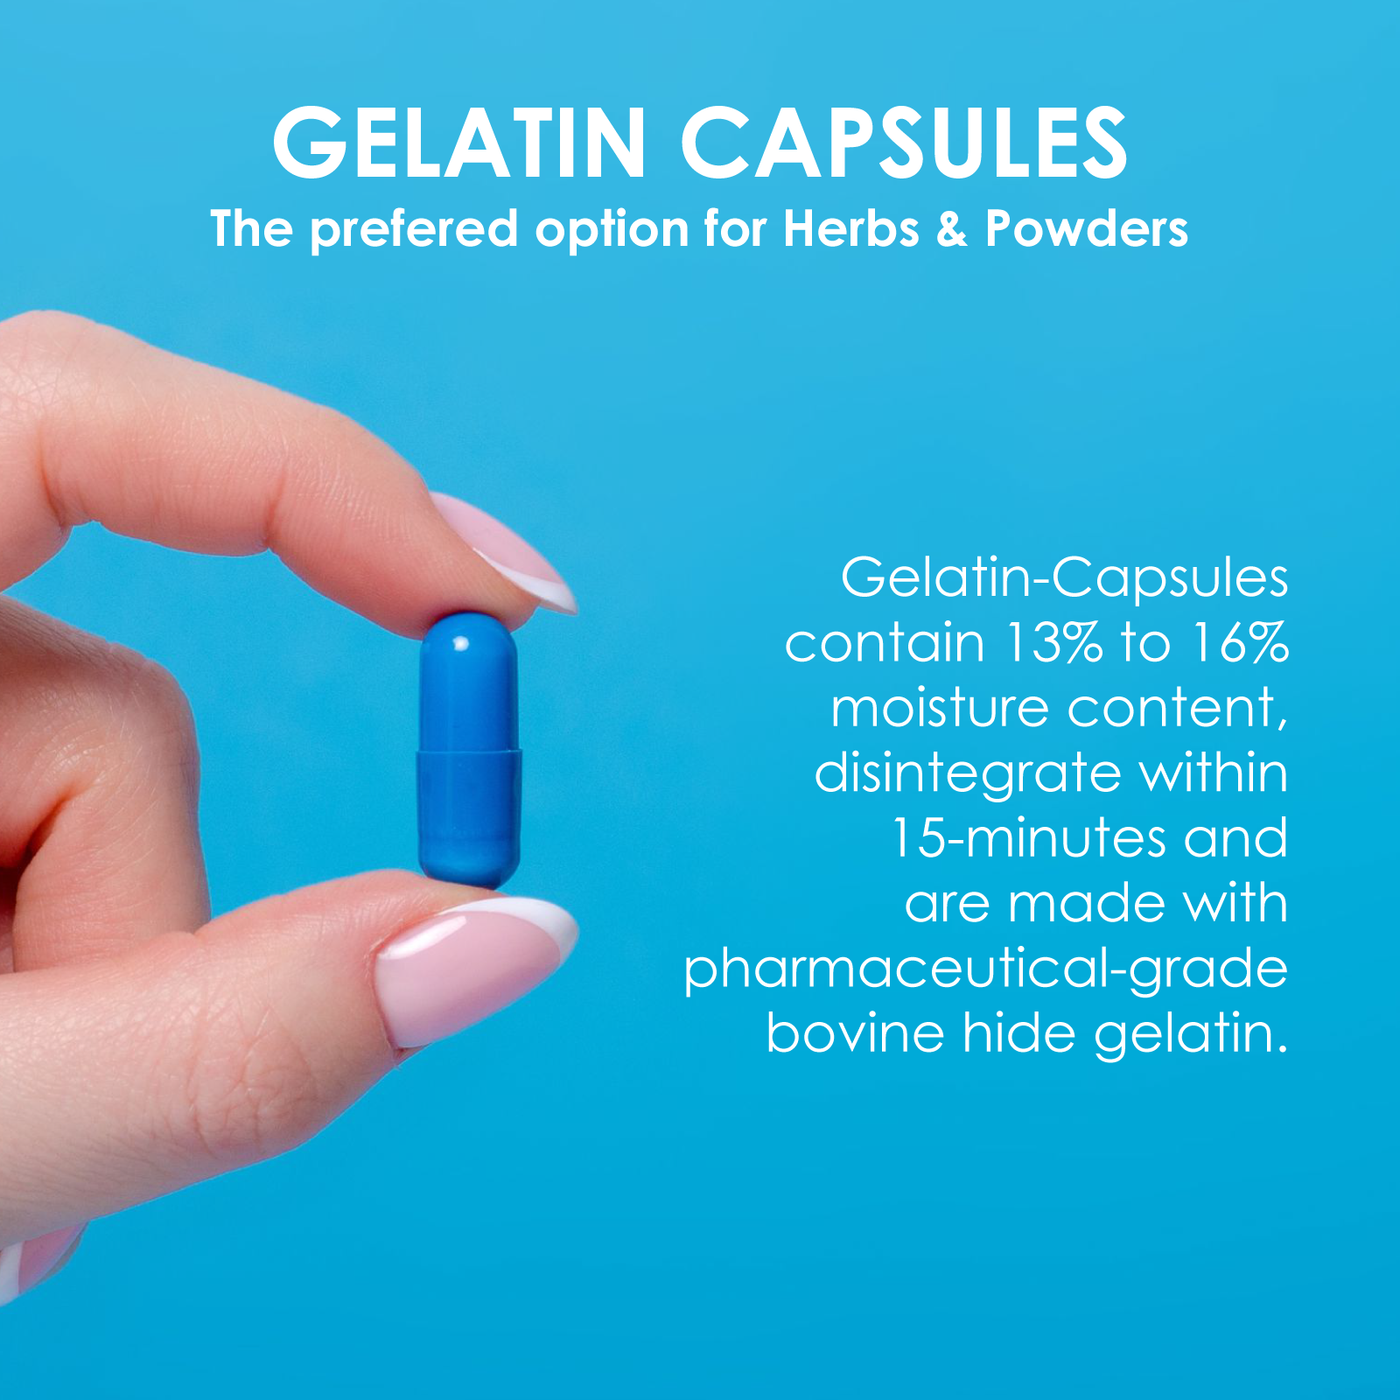 Colored Size 000 Empty Gelatin Capsules by Capsuline - Blue/White 1000 Count - 1000